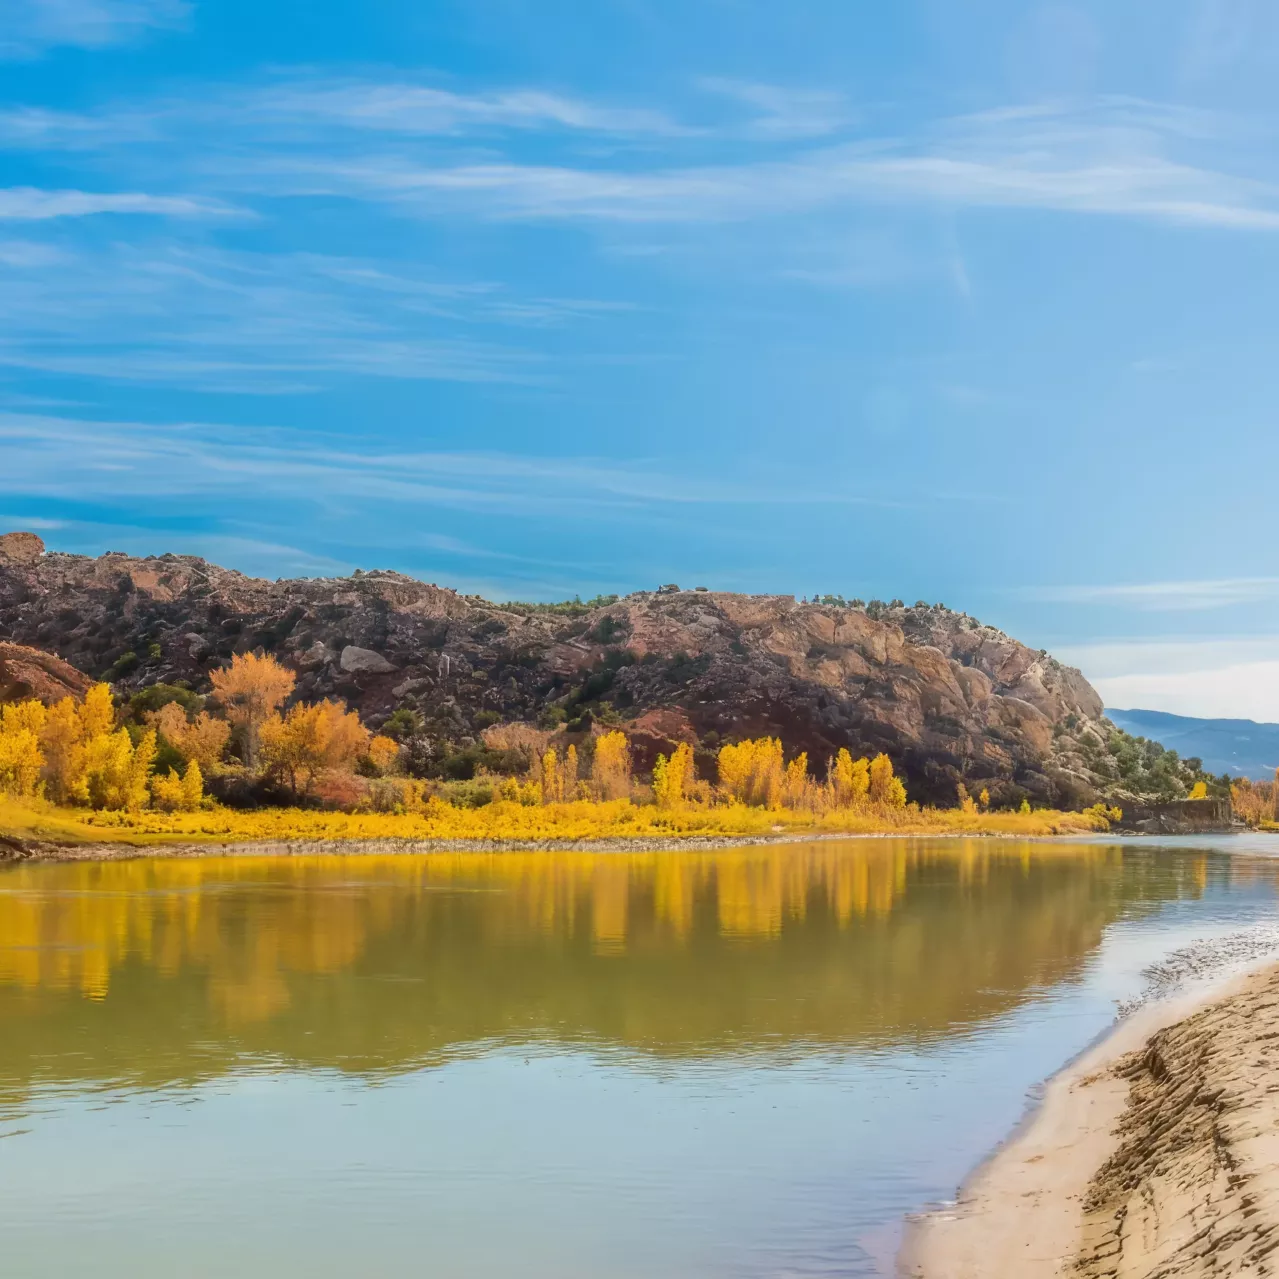 Tranquil river scene with a sandy shore in the foreground, reflective water, and a rocky hill with autumn-colored trees under a clear sky.